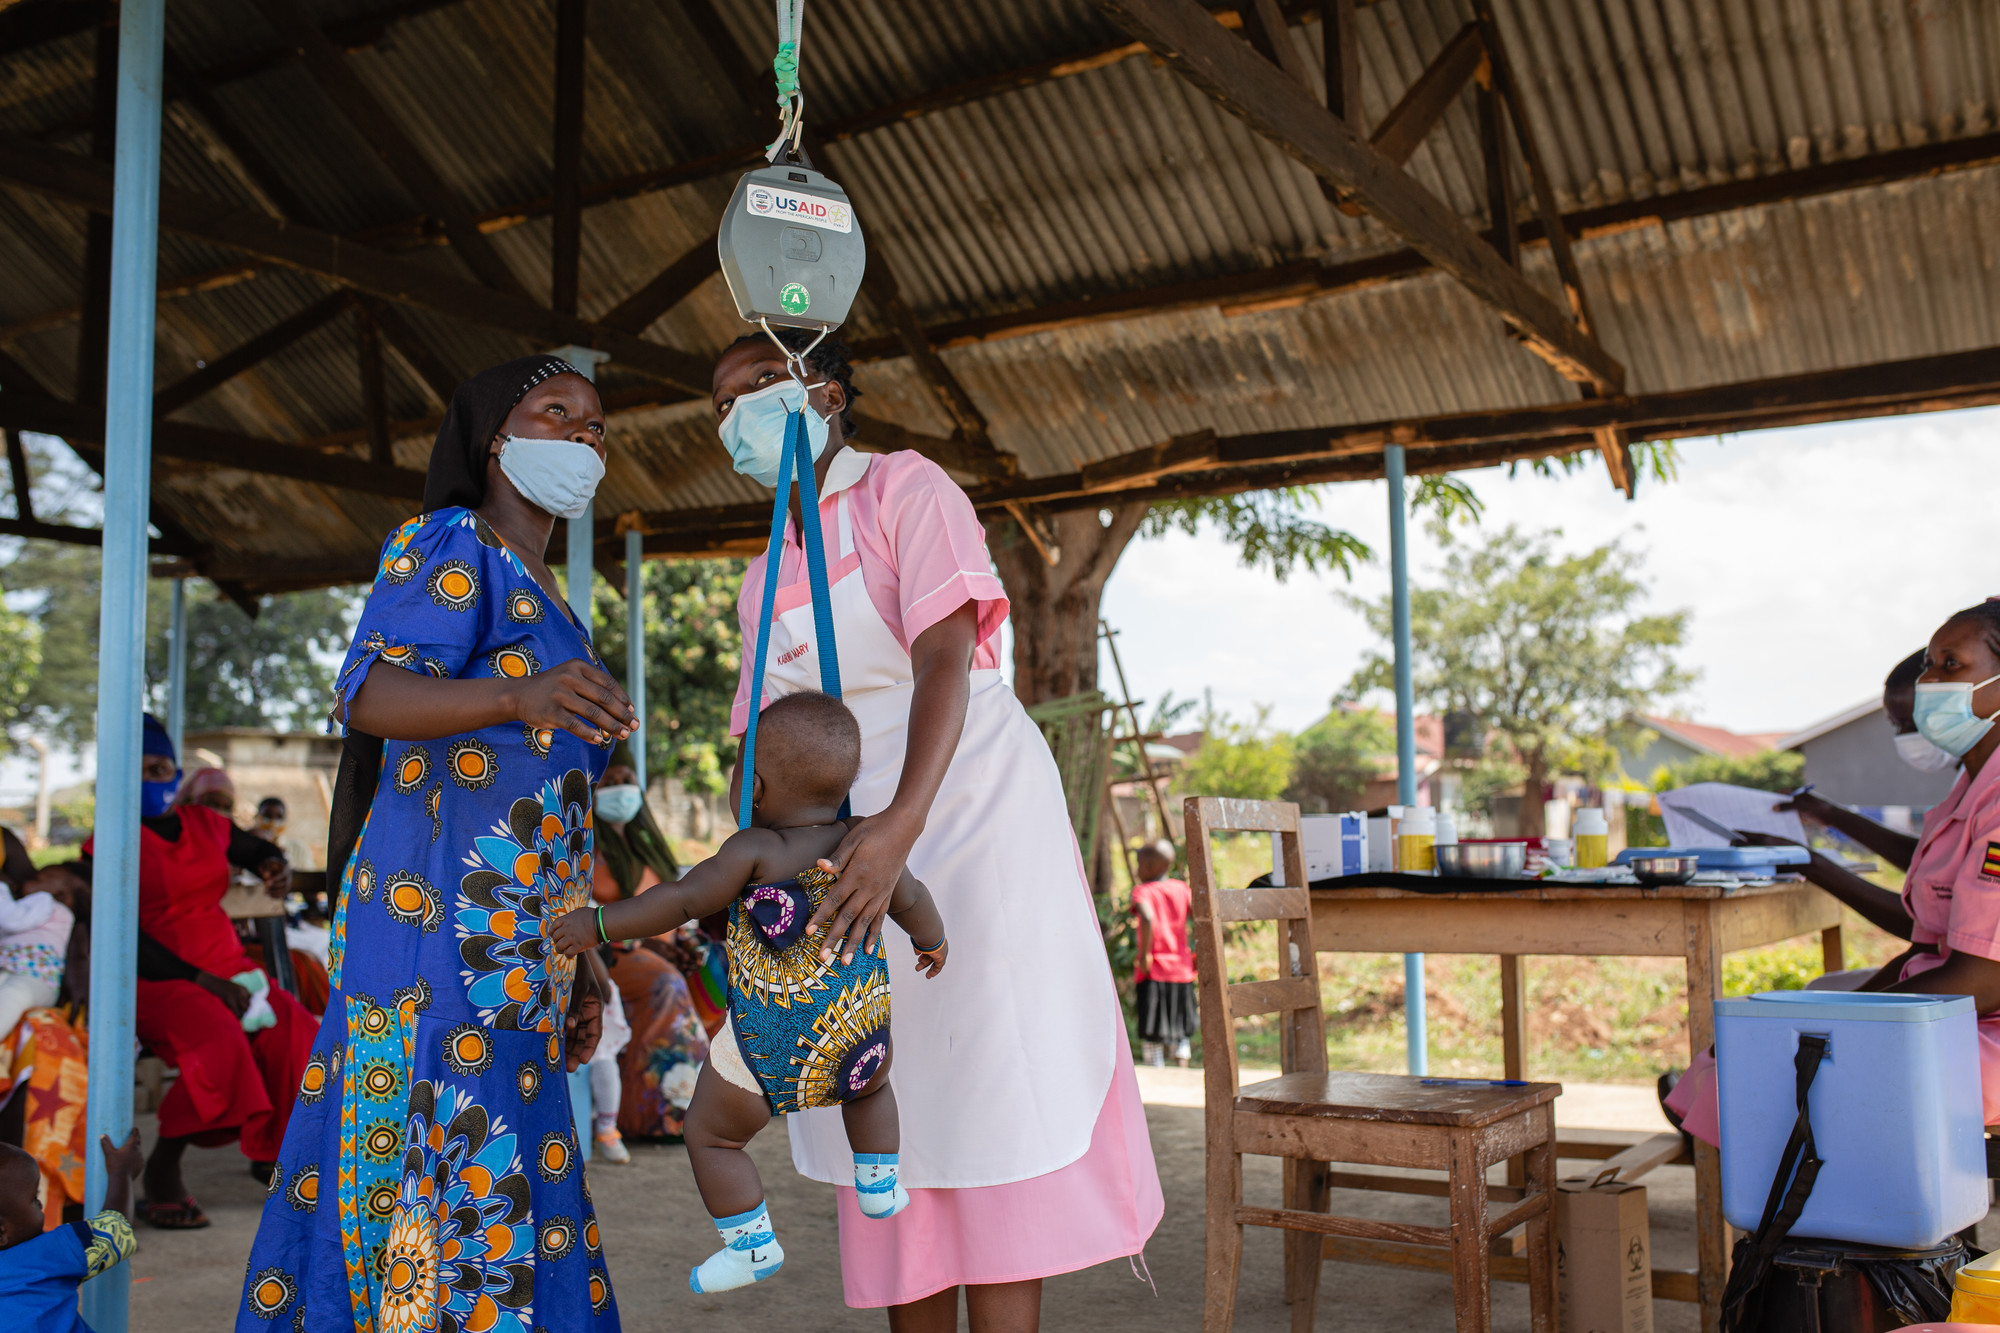 Namuwaya Nsabu weighs her 9 month old baby before receiving immunization services at Nakaloke Health Center III in Mbale, Uganda. Photo by Esther Ruth Mbabazi for IntraHealth International.